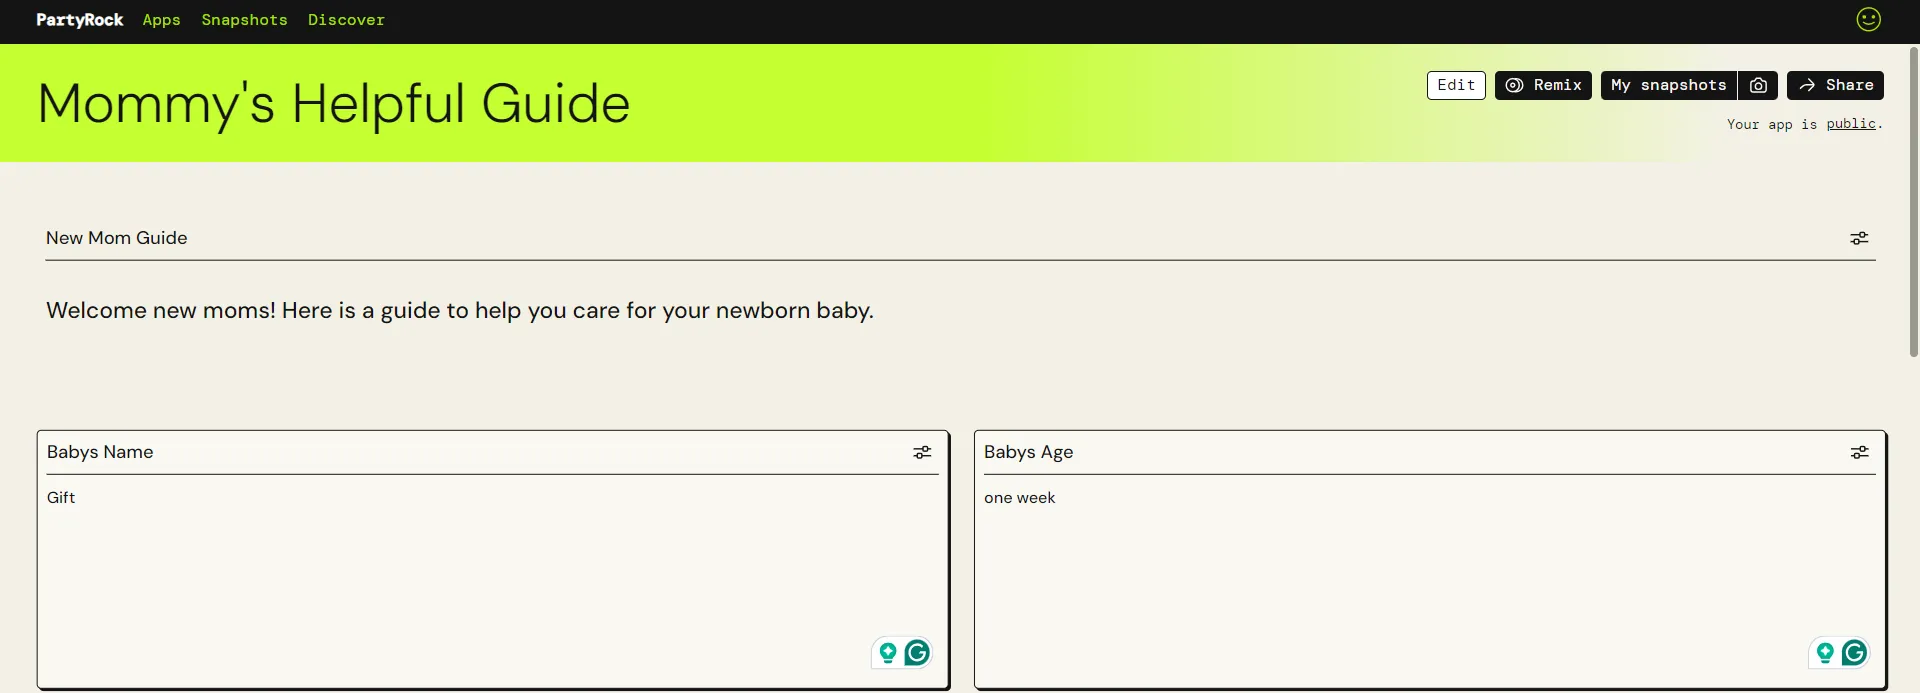 Created widgets for you to put your Baby's name and age